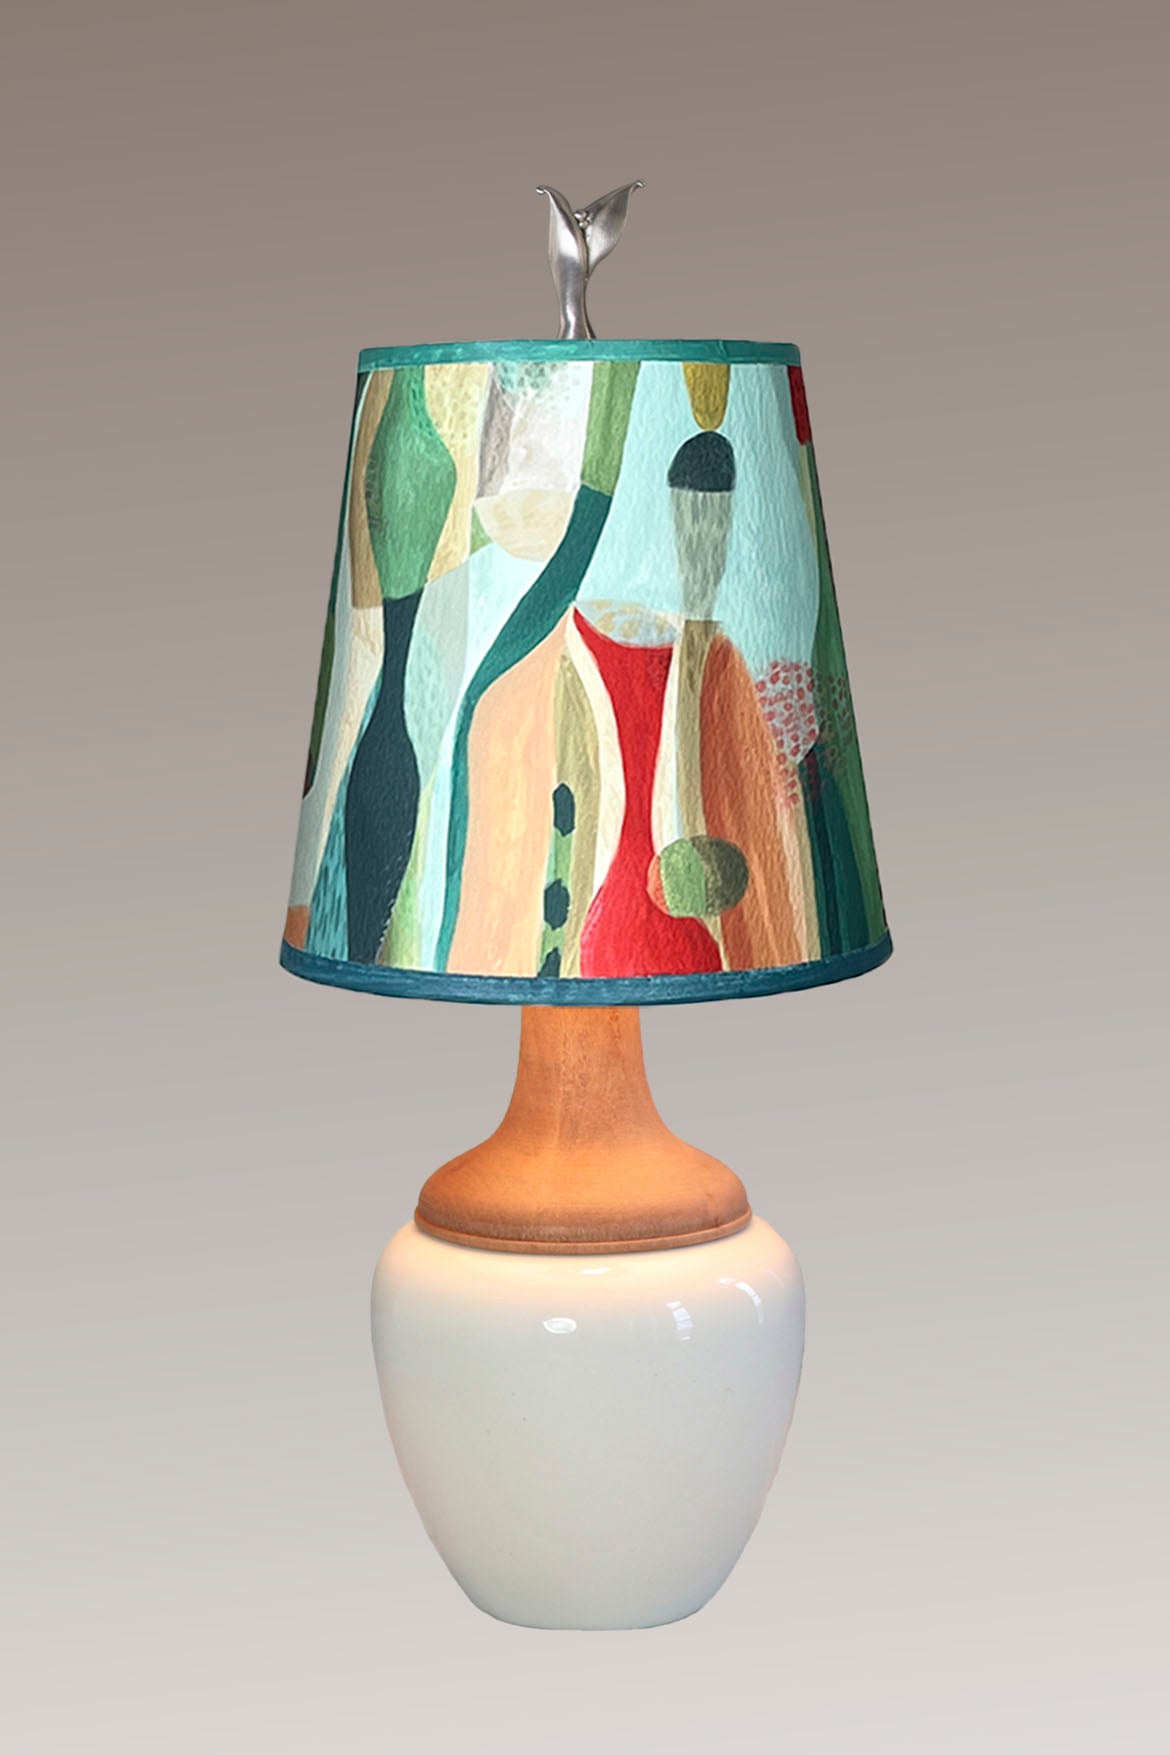 Janna Ugone &amp; Co Table Lamp Ceramic and Maple Table Lamp in Ivory Gloss with Small Drum Shade in Riviera in Poppy